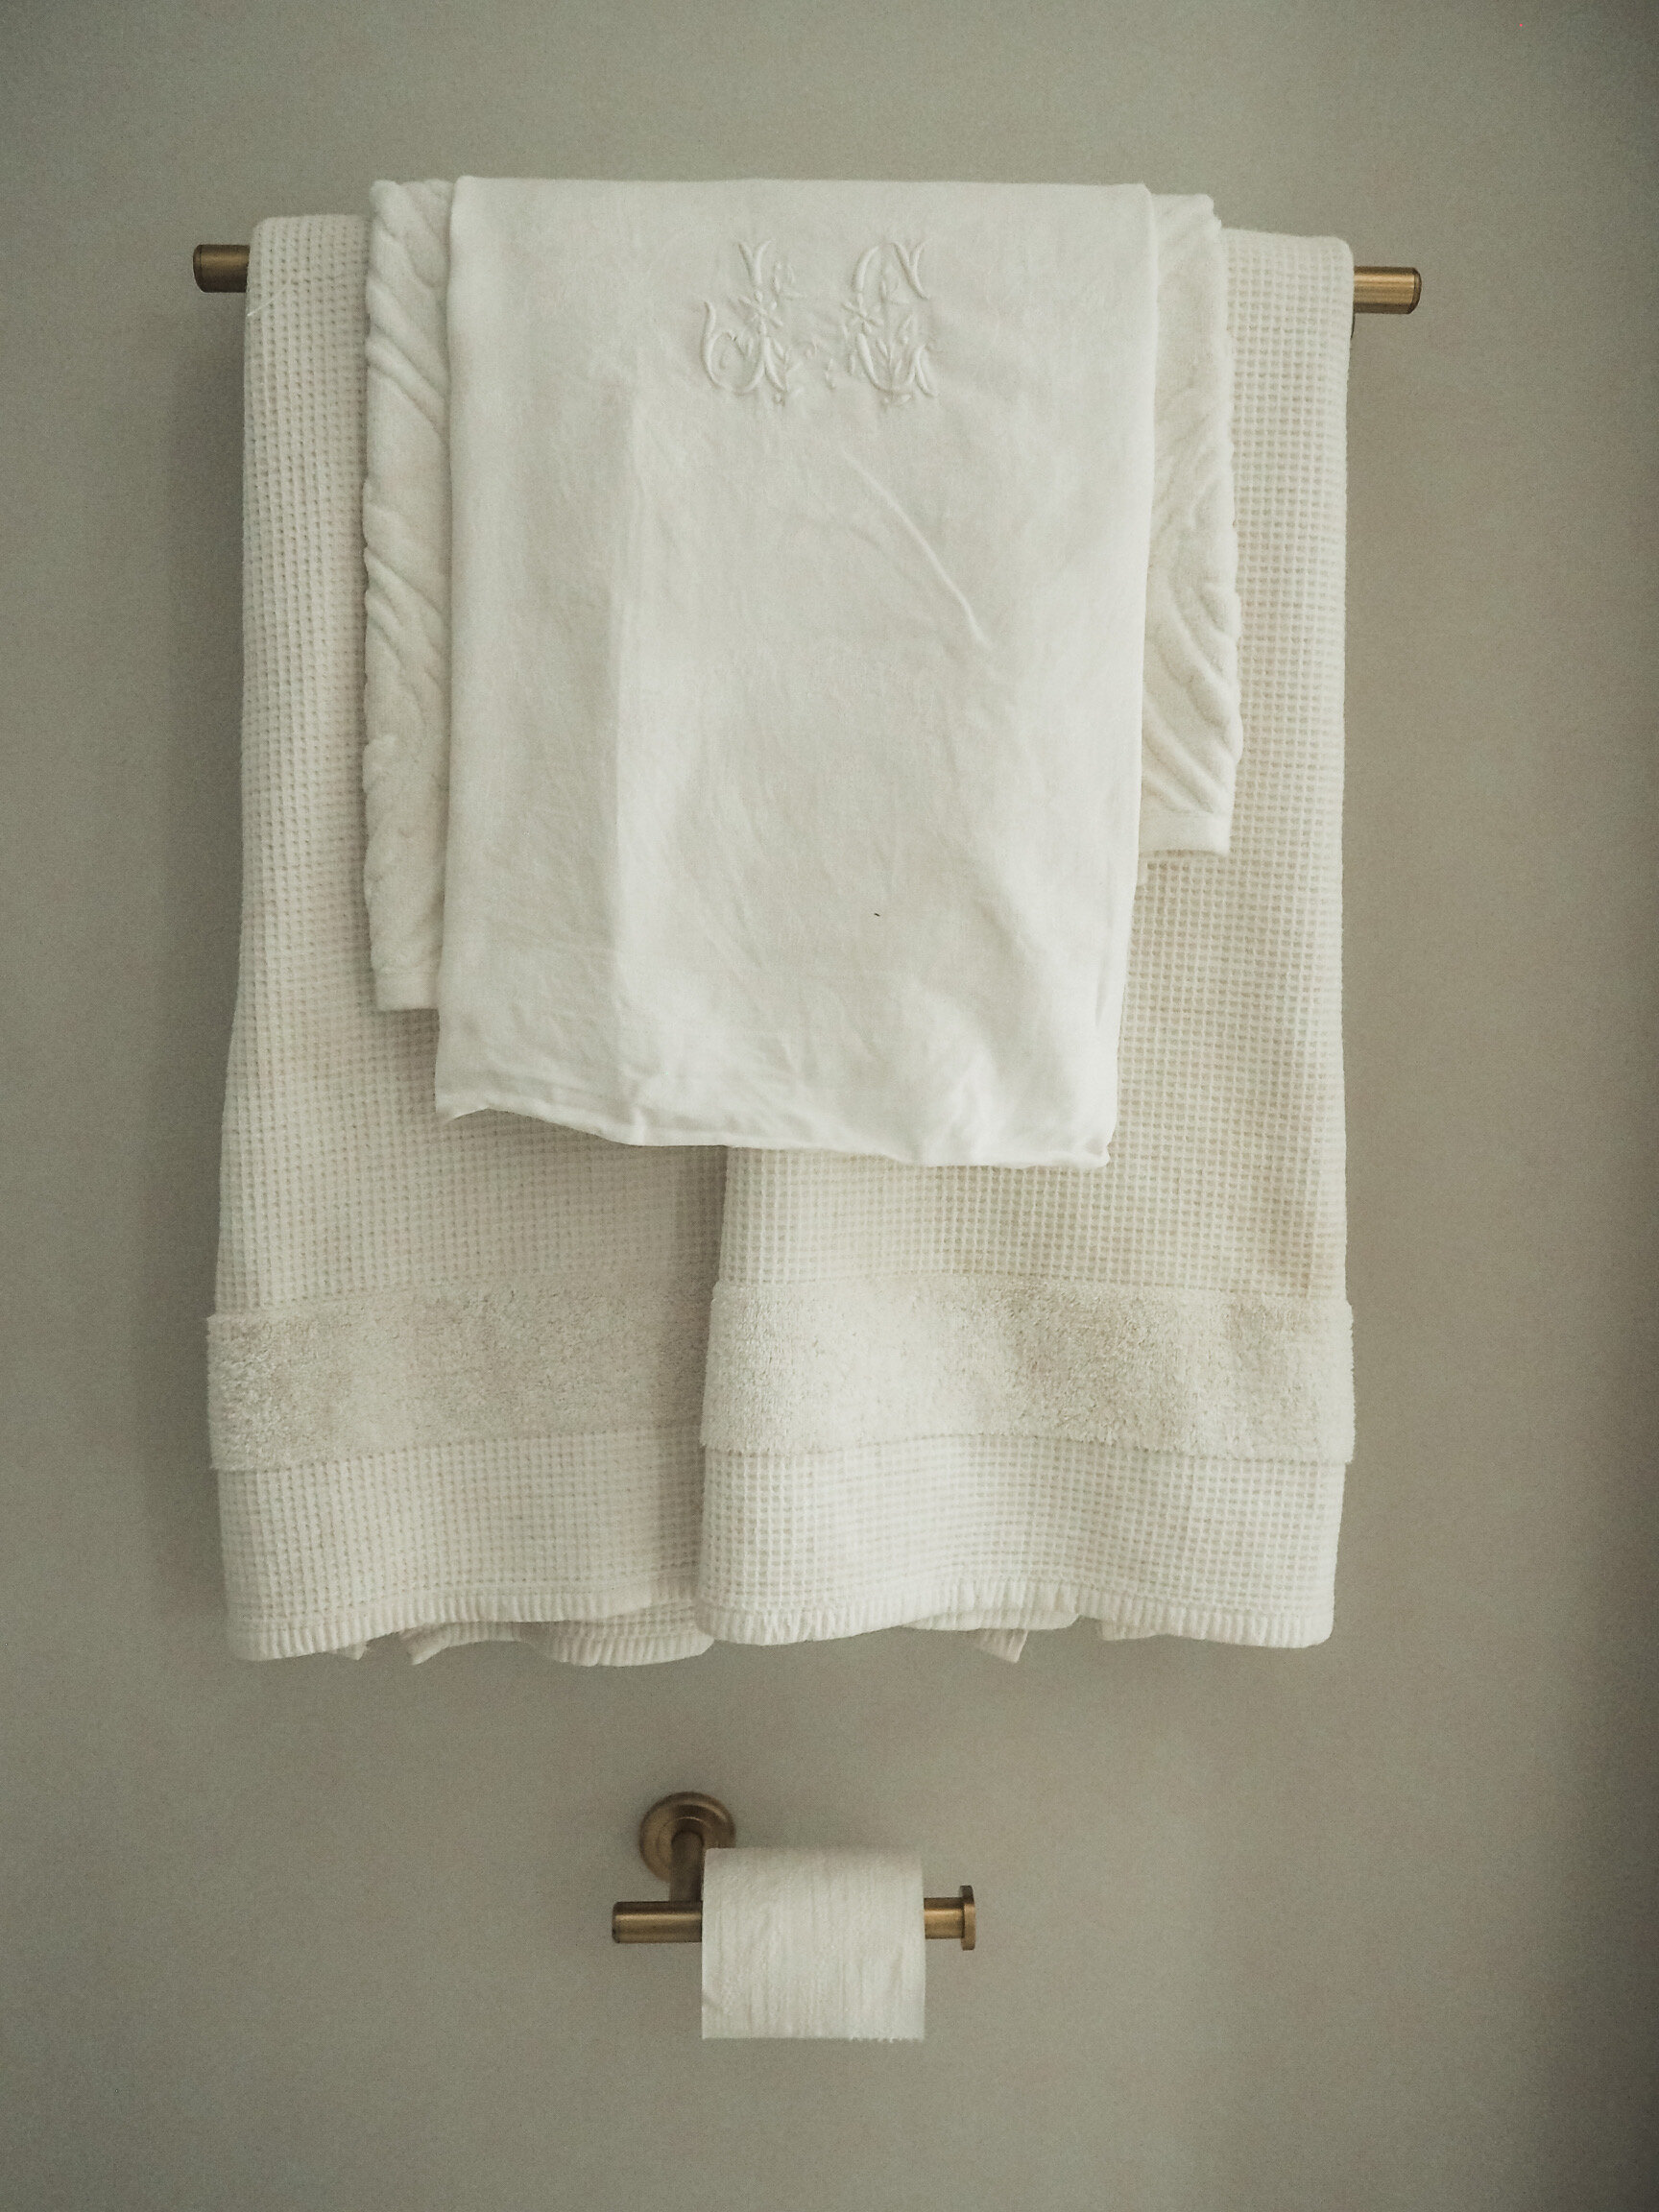 Simple white towels and an antique French linen napkin as a hand towel